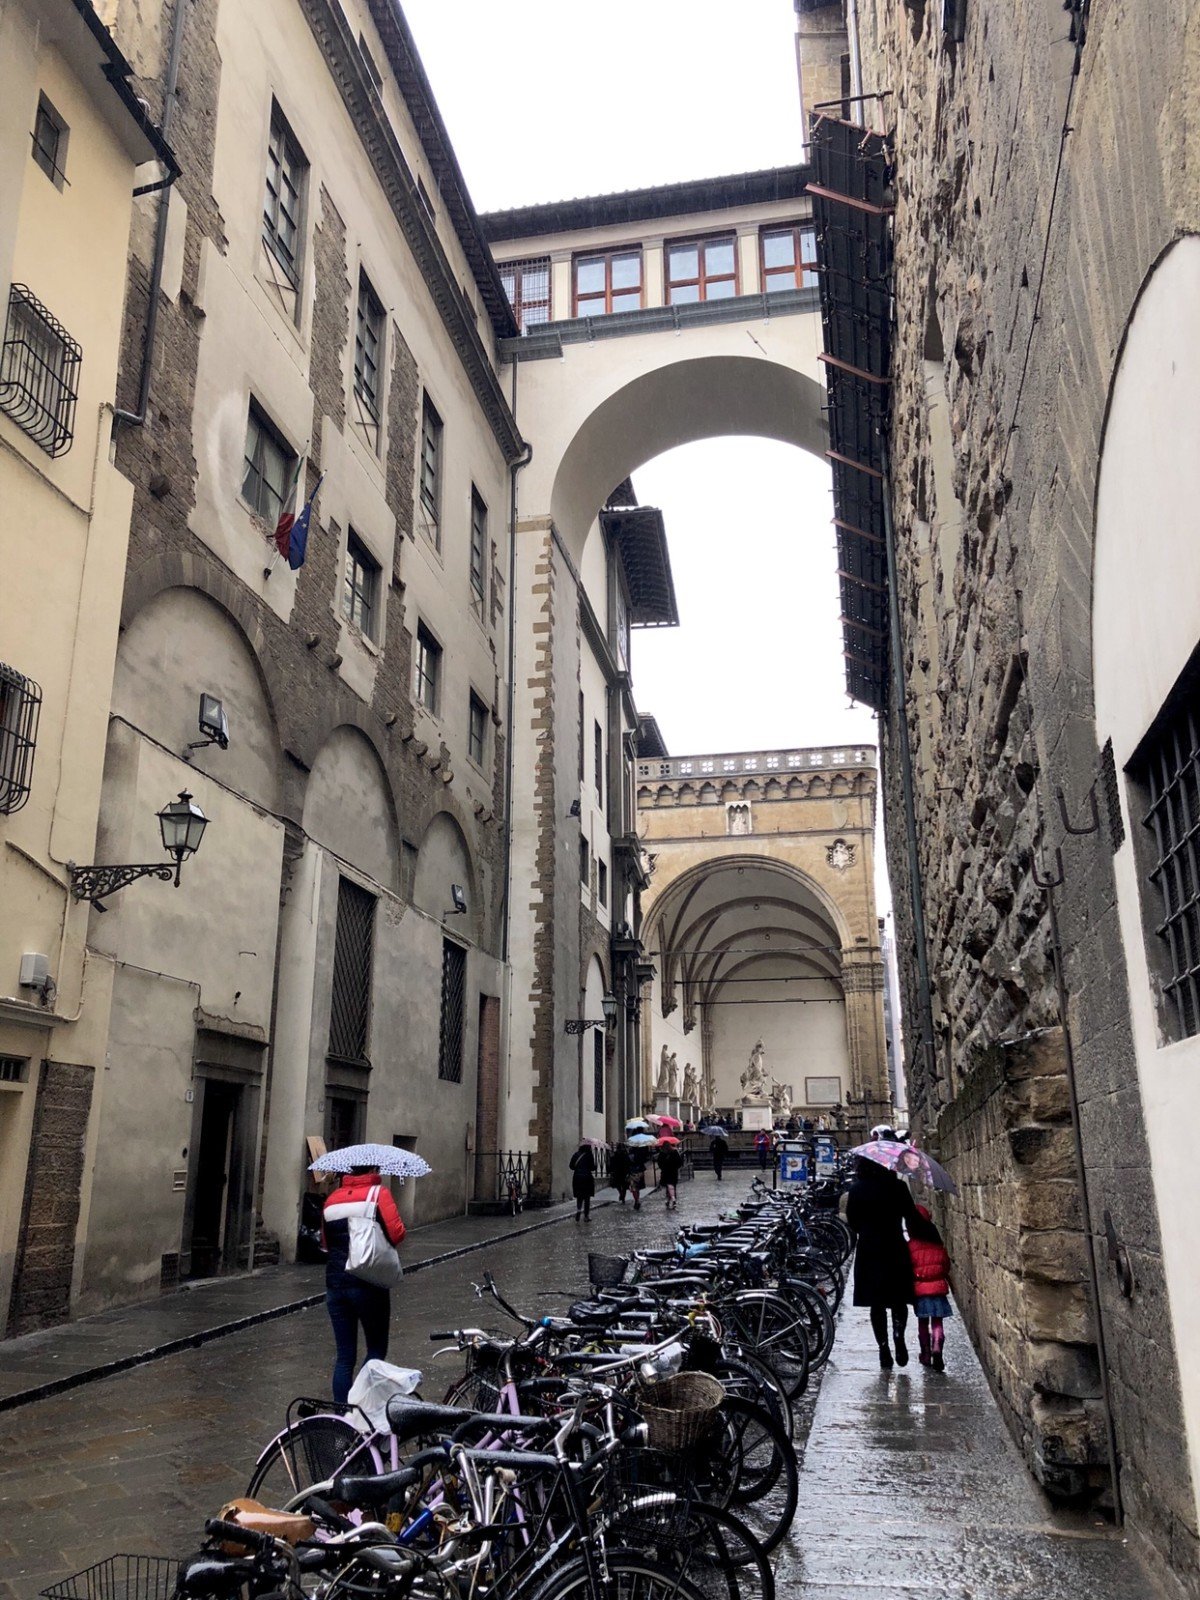 Part of the Vasari Corridor viewed from the street, Florence